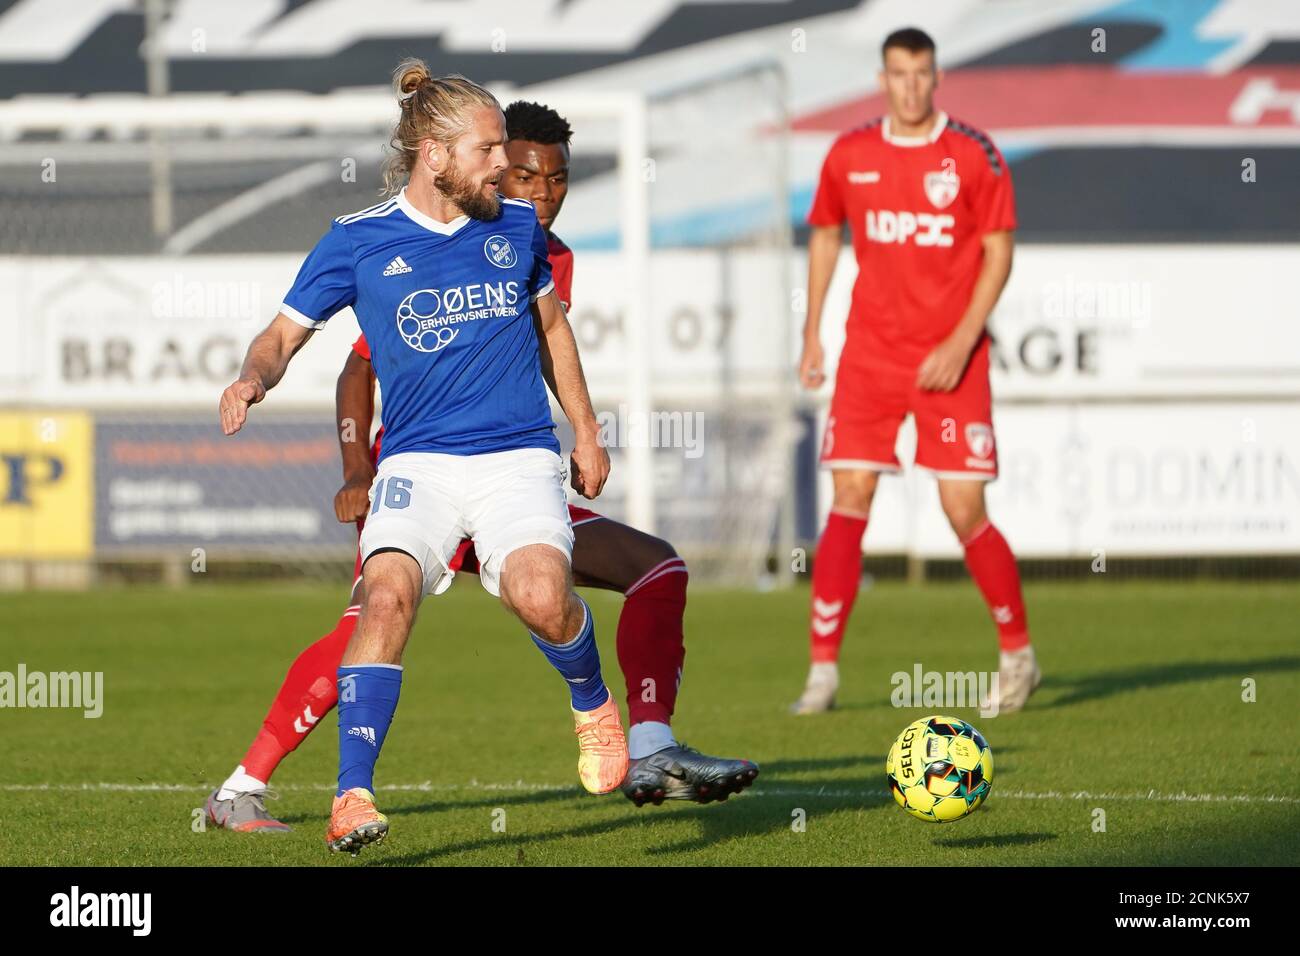 Fredericia, Denmark, 17th, September 2020. Kasper Fisker (16) of Fremad  Amager seen during the NordicBet Liga match between FC Fredericia and  Fremad Amager at Monjasa Park in Fredericia. (Photo credit: Gonzales Photo -